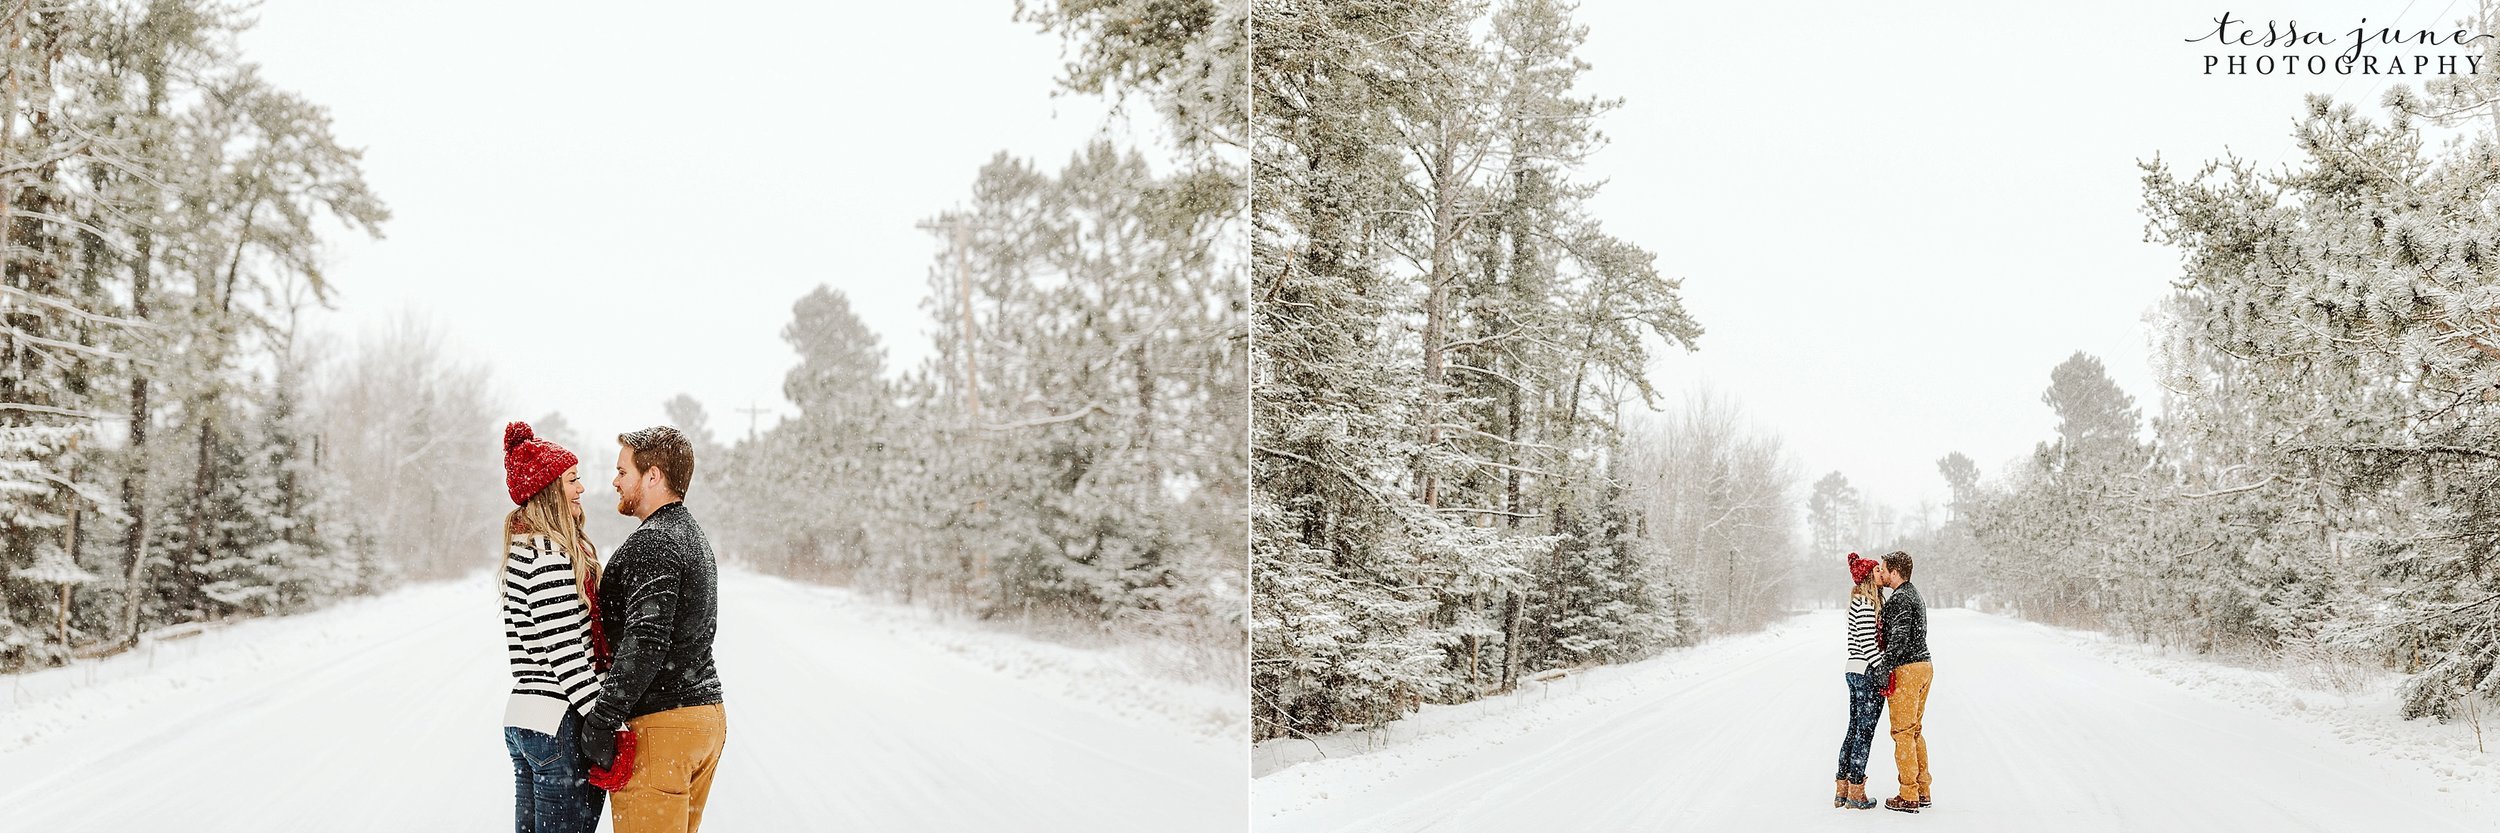 duluth-winter-engagement-forest-photos-during-snow-storm-40.jpg